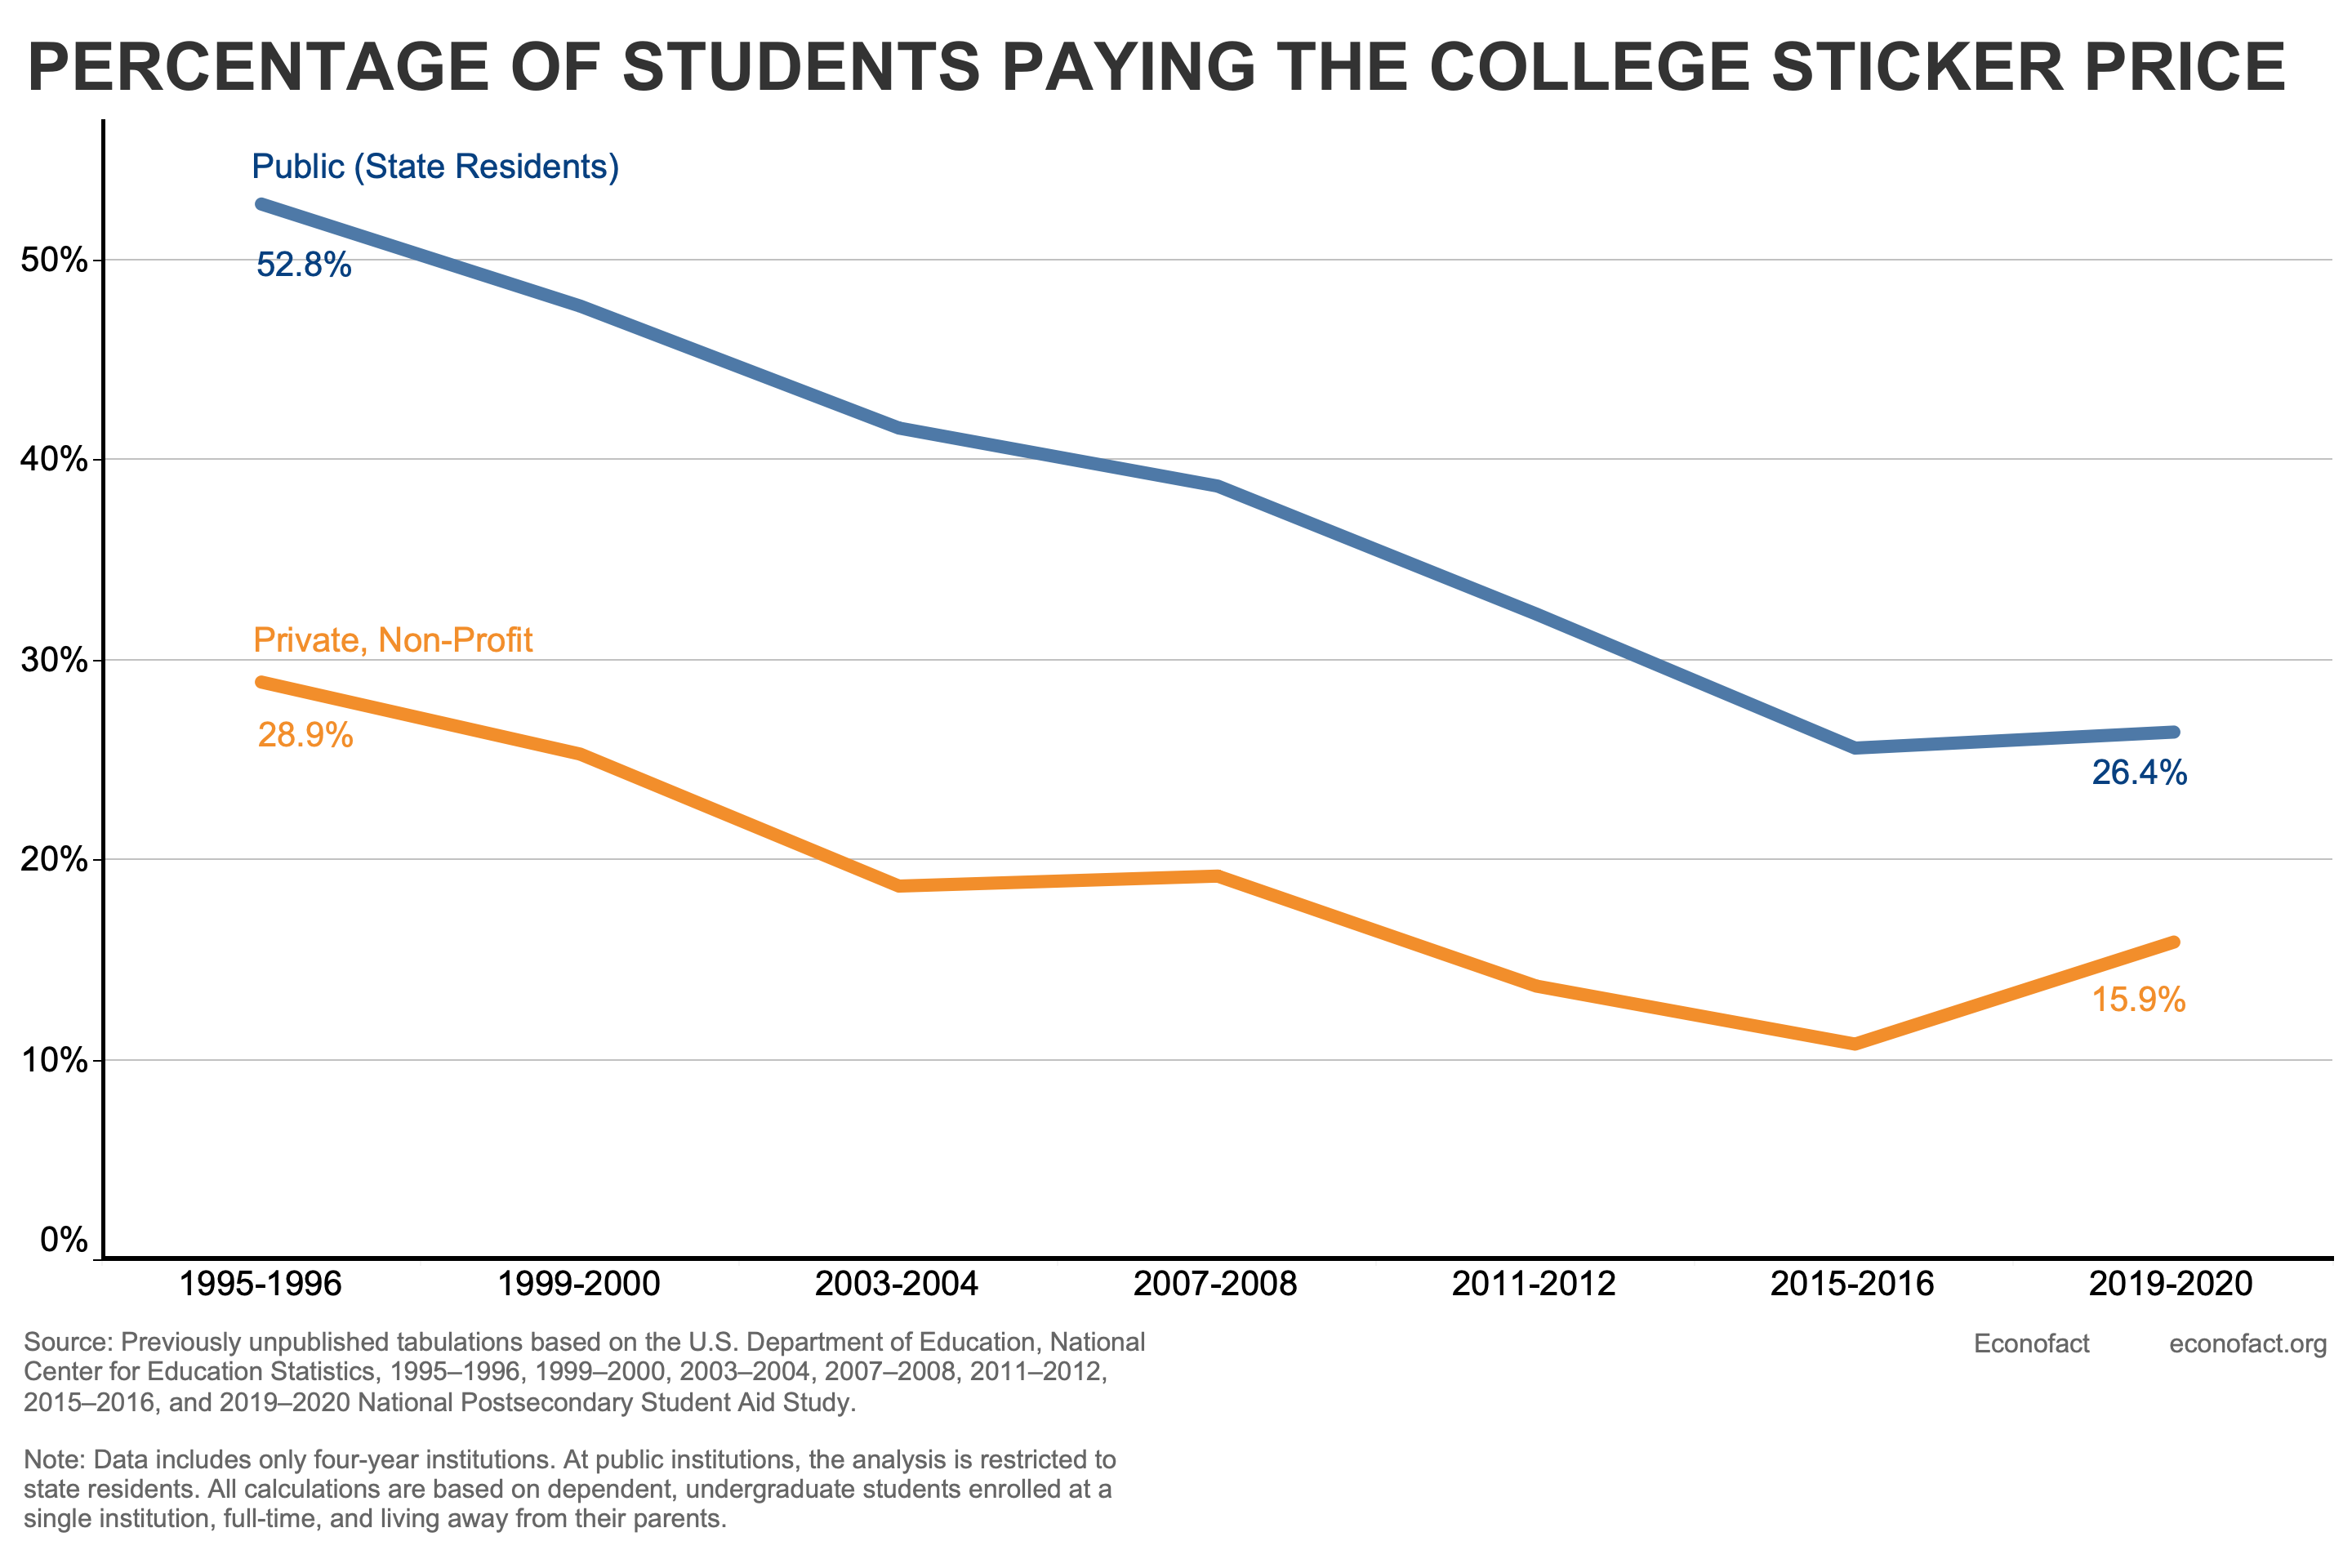 Percentage of Students Paying the College Sticker Price